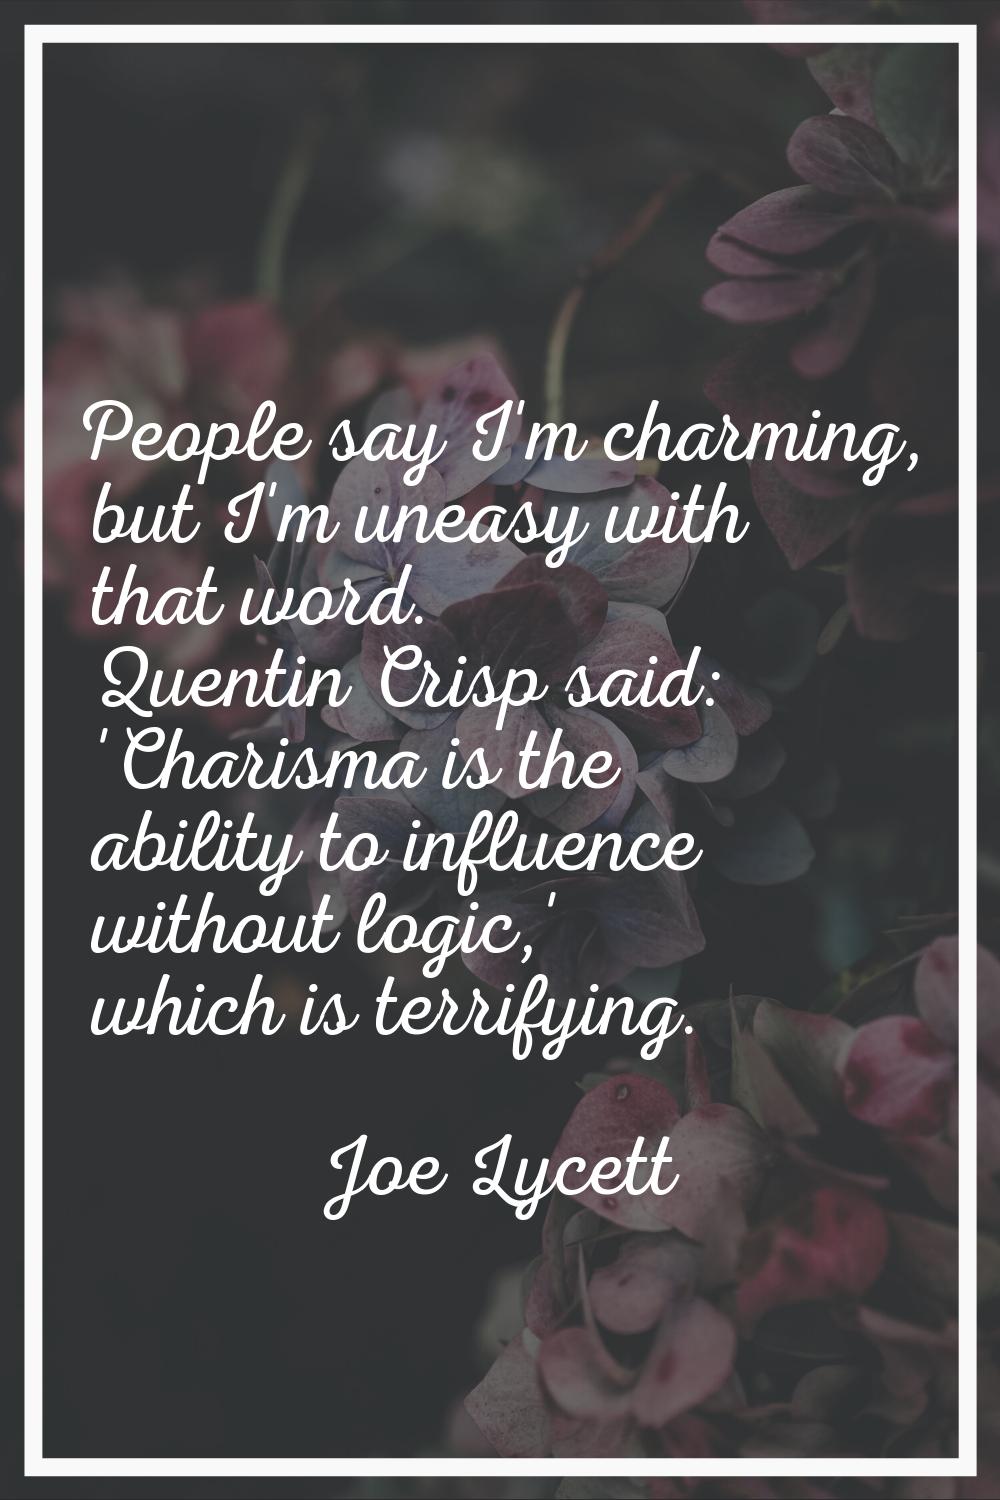 People say I'm charming, but I'm uneasy with that word. Quentin Crisp said: 'Charisma is the abilit